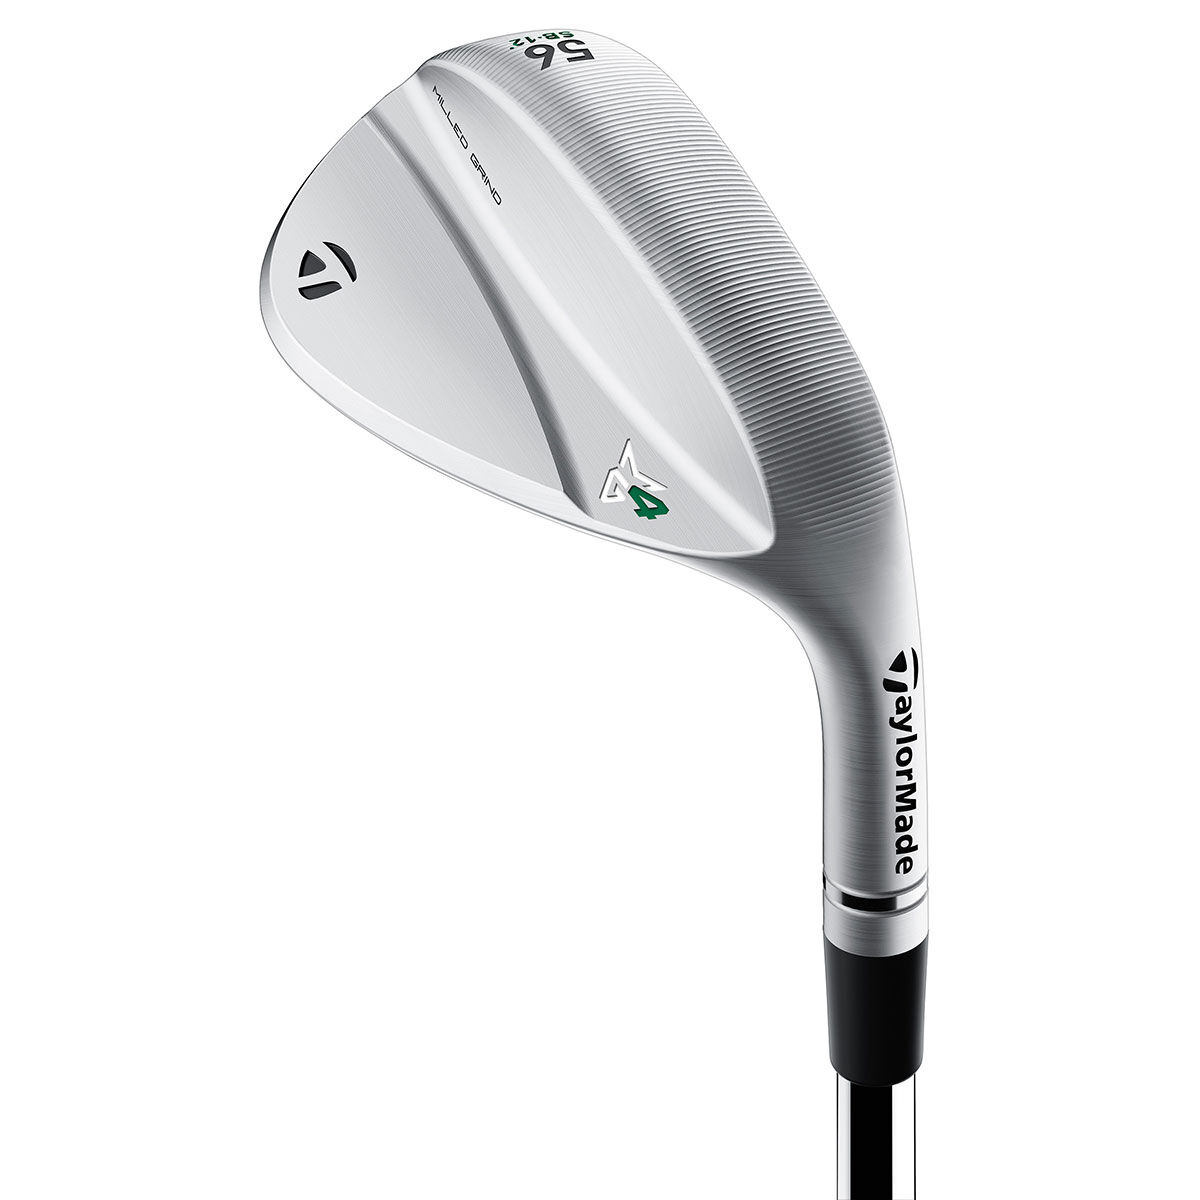 TaylorMade Men's Silver Milled Grind 4 Chrome Left Hand Golf Wedge | American Golf, One Size - Father's Day Gift von TaylorMade